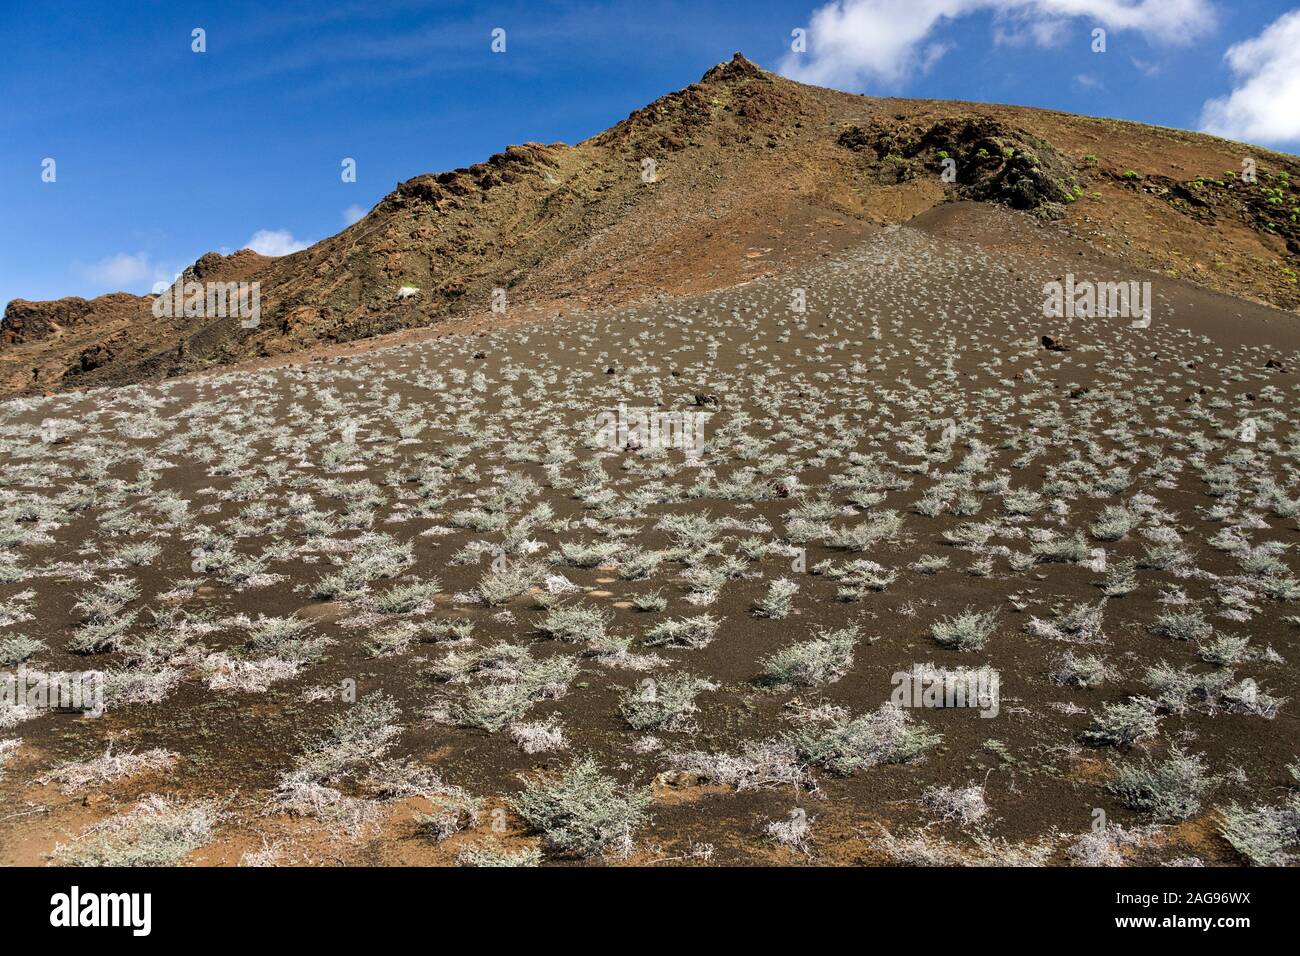 Grey Matplant (Tiquilia nesiotica) growing on the side of a volcano cinder cone on the island of Bartolome in the Galapagos Islands, Ecuador. Stock Photo